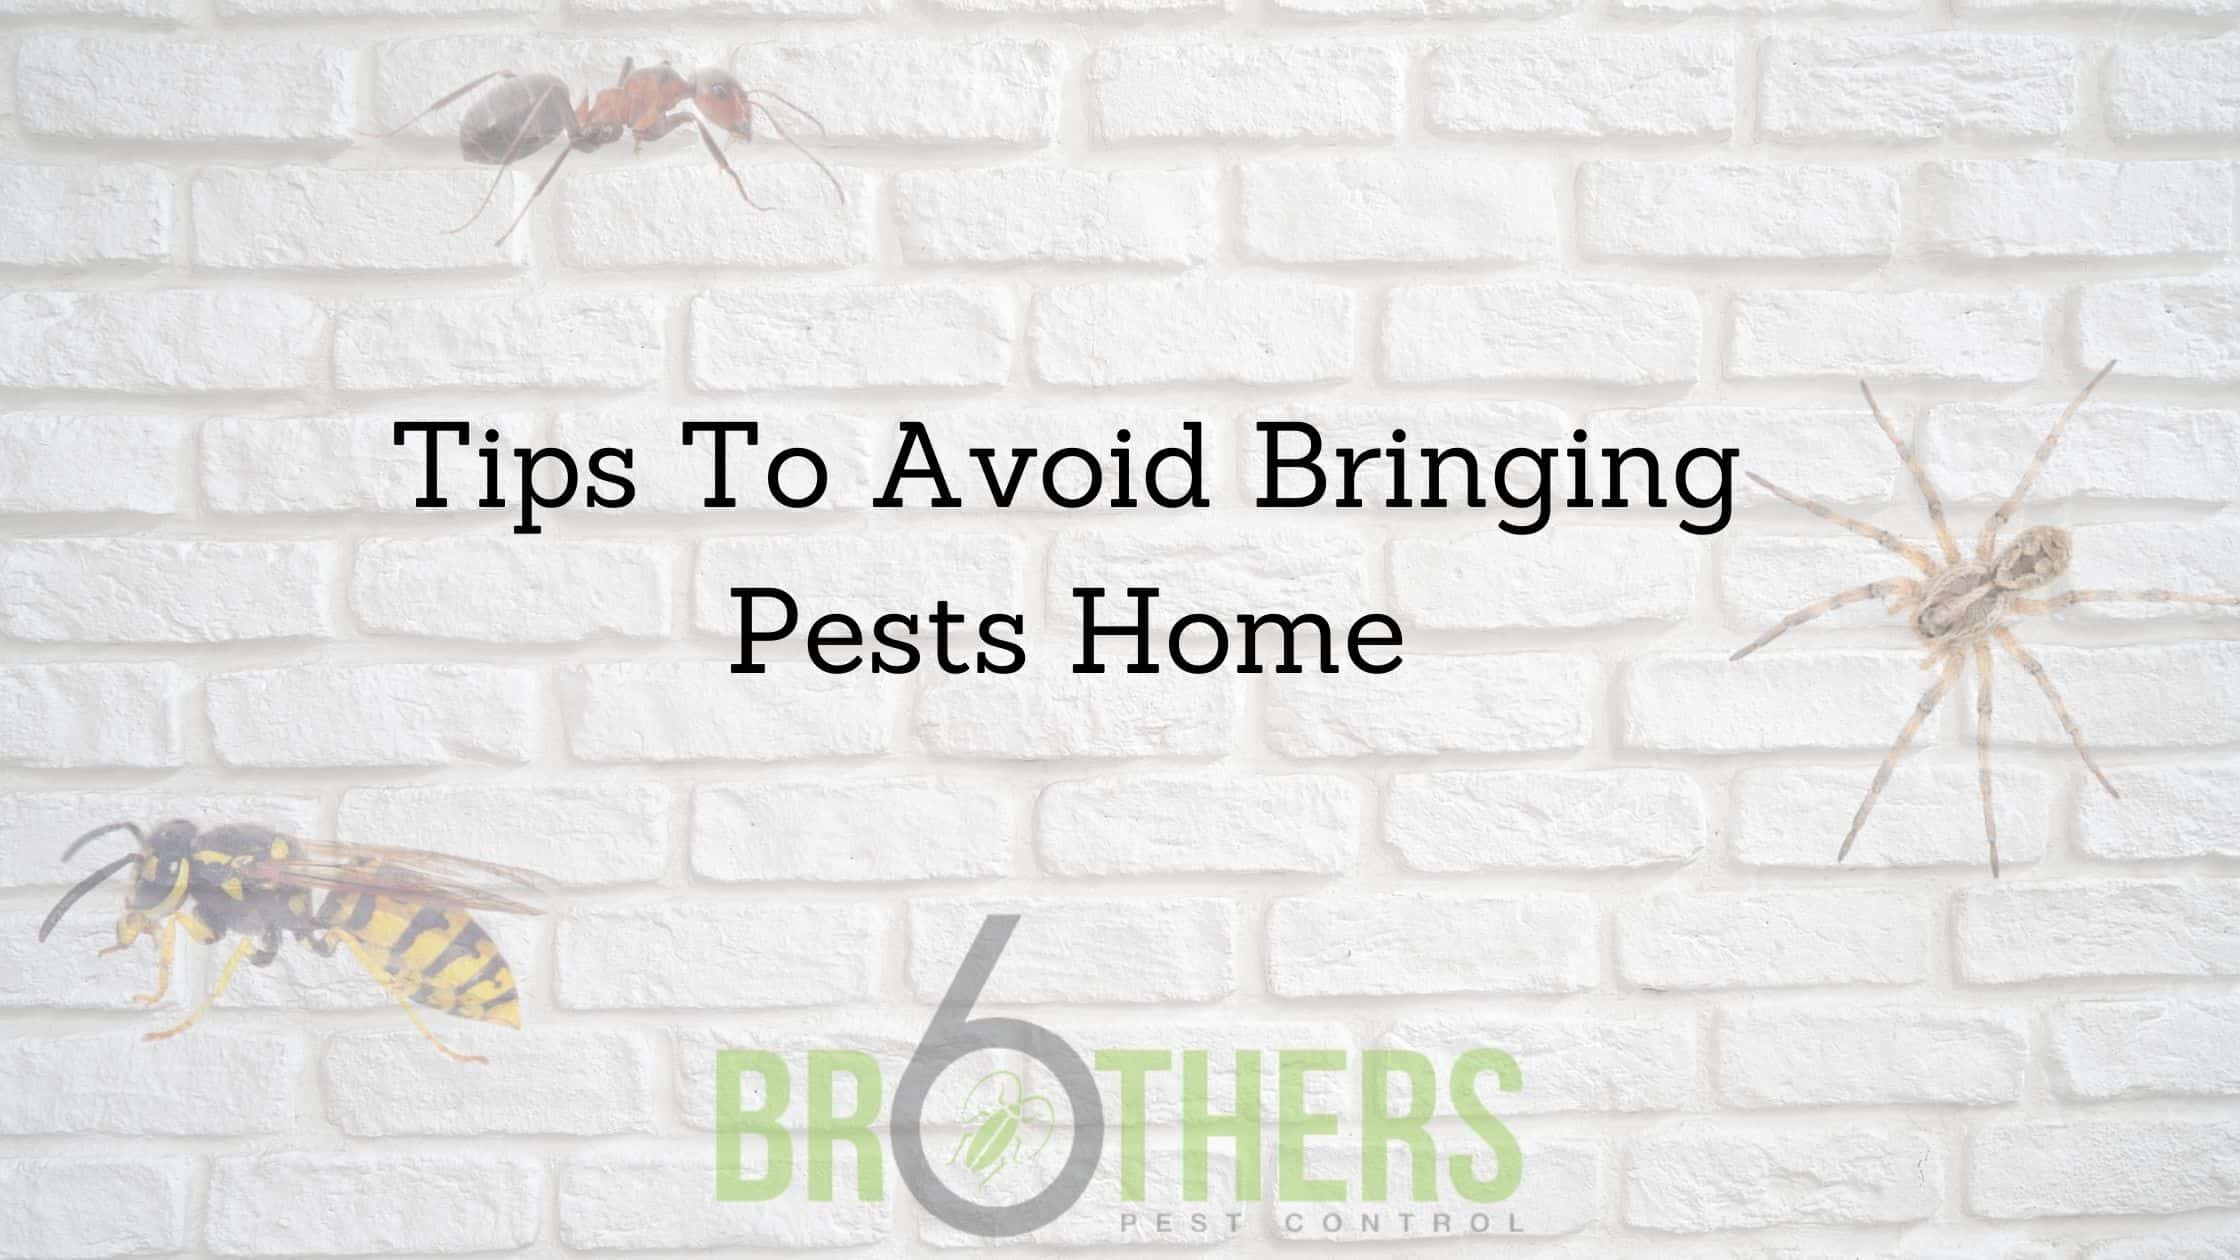 Tips To Avoid Bringing Pests Home